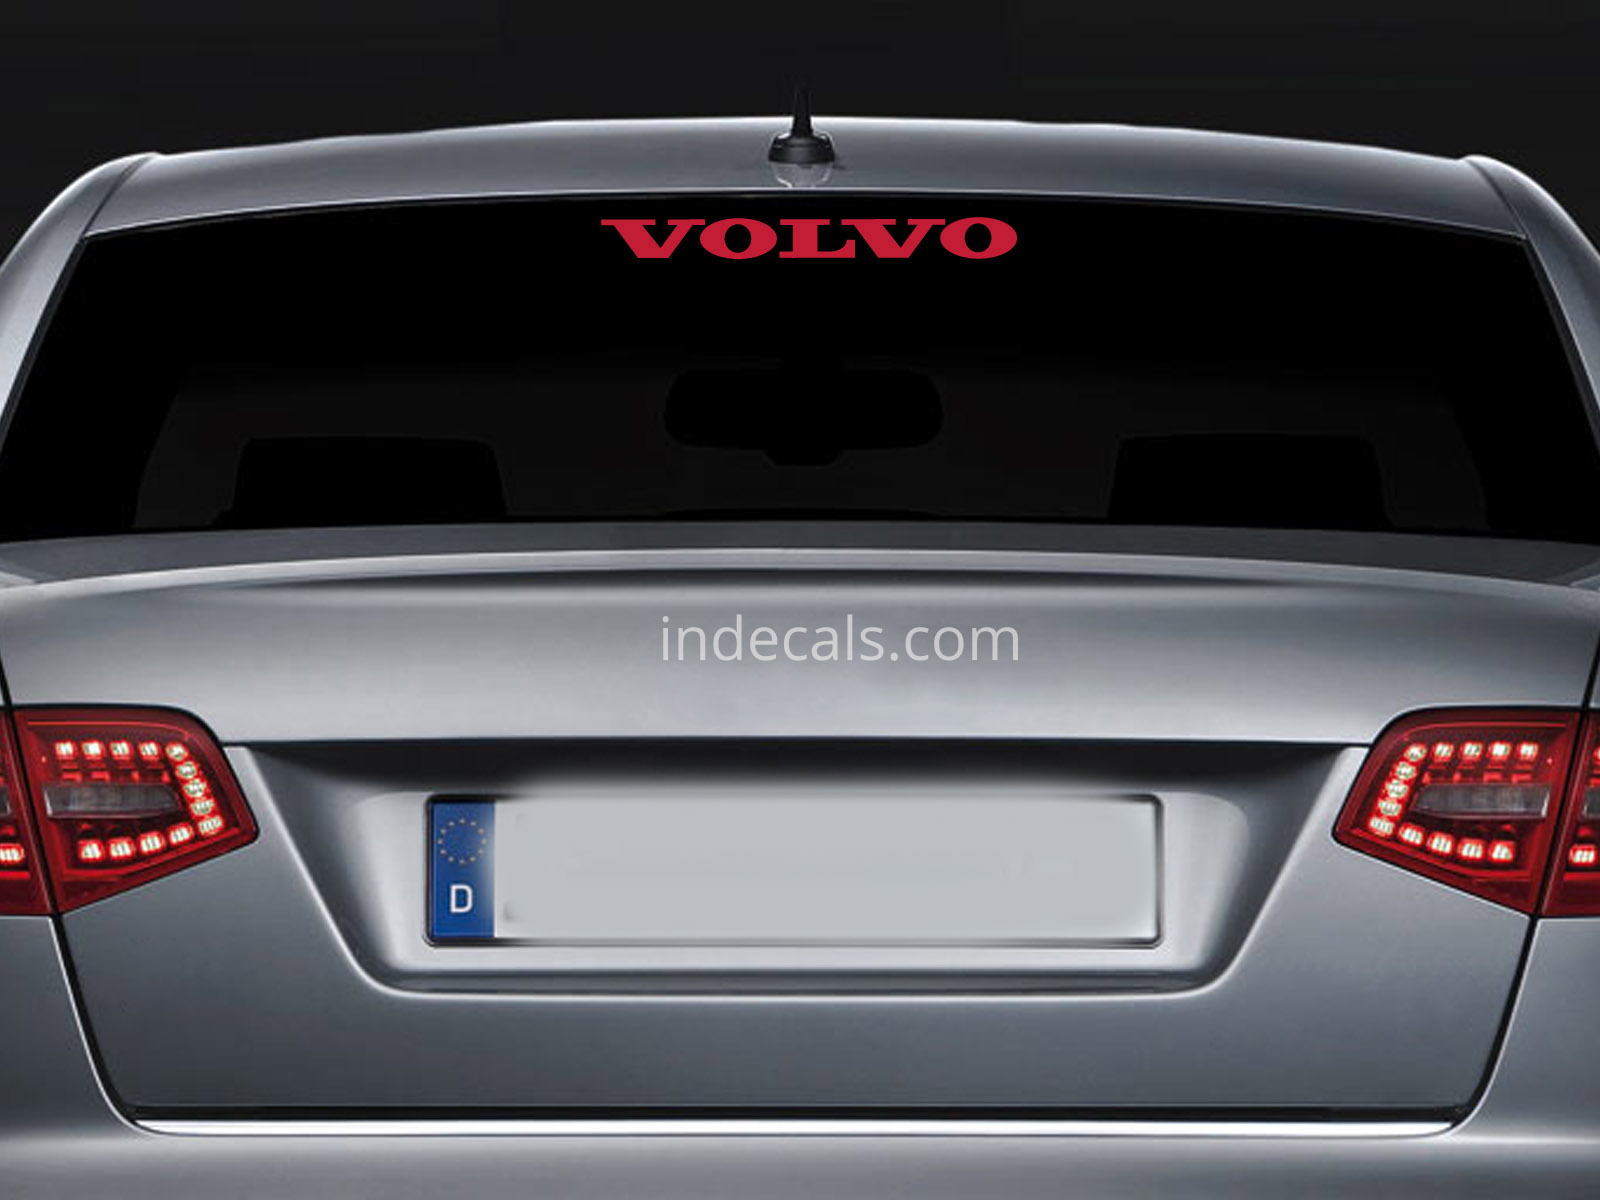 1 x Volvo Sticker for Windshield or Back Window - Red